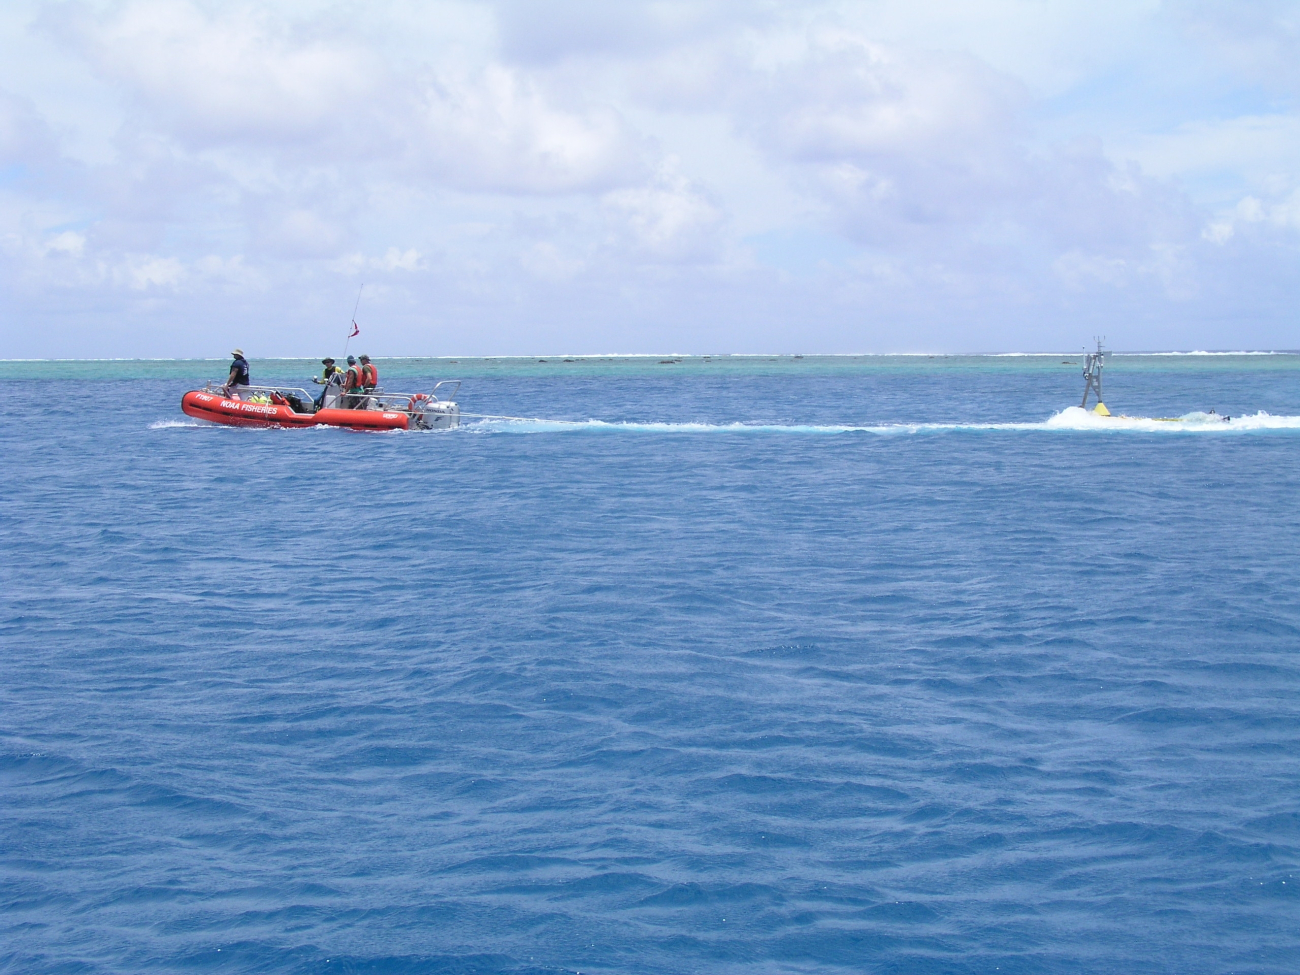 Oceanographers tow a CREWS buoy through a channel for deploymentinside of an atoll lagoon